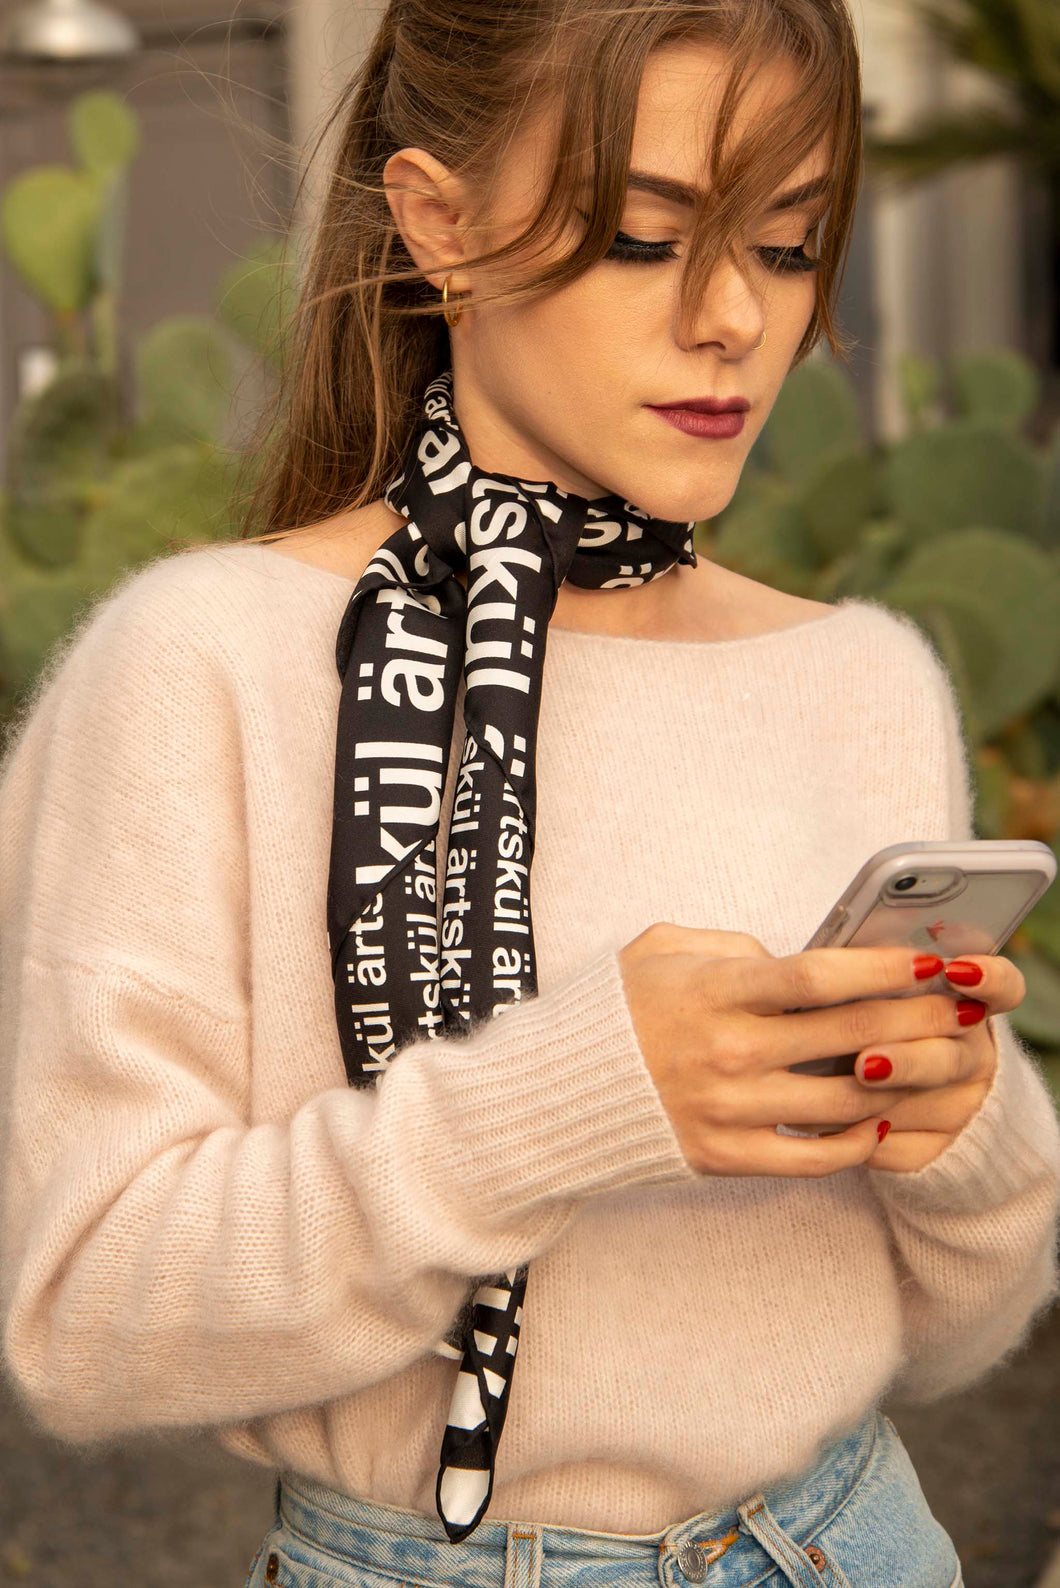 Transform our artskul square scarf into a long skinny scarf with a simple fold and roll. Our classic black and white logo scarf adds a sharp and finished statement to your style.